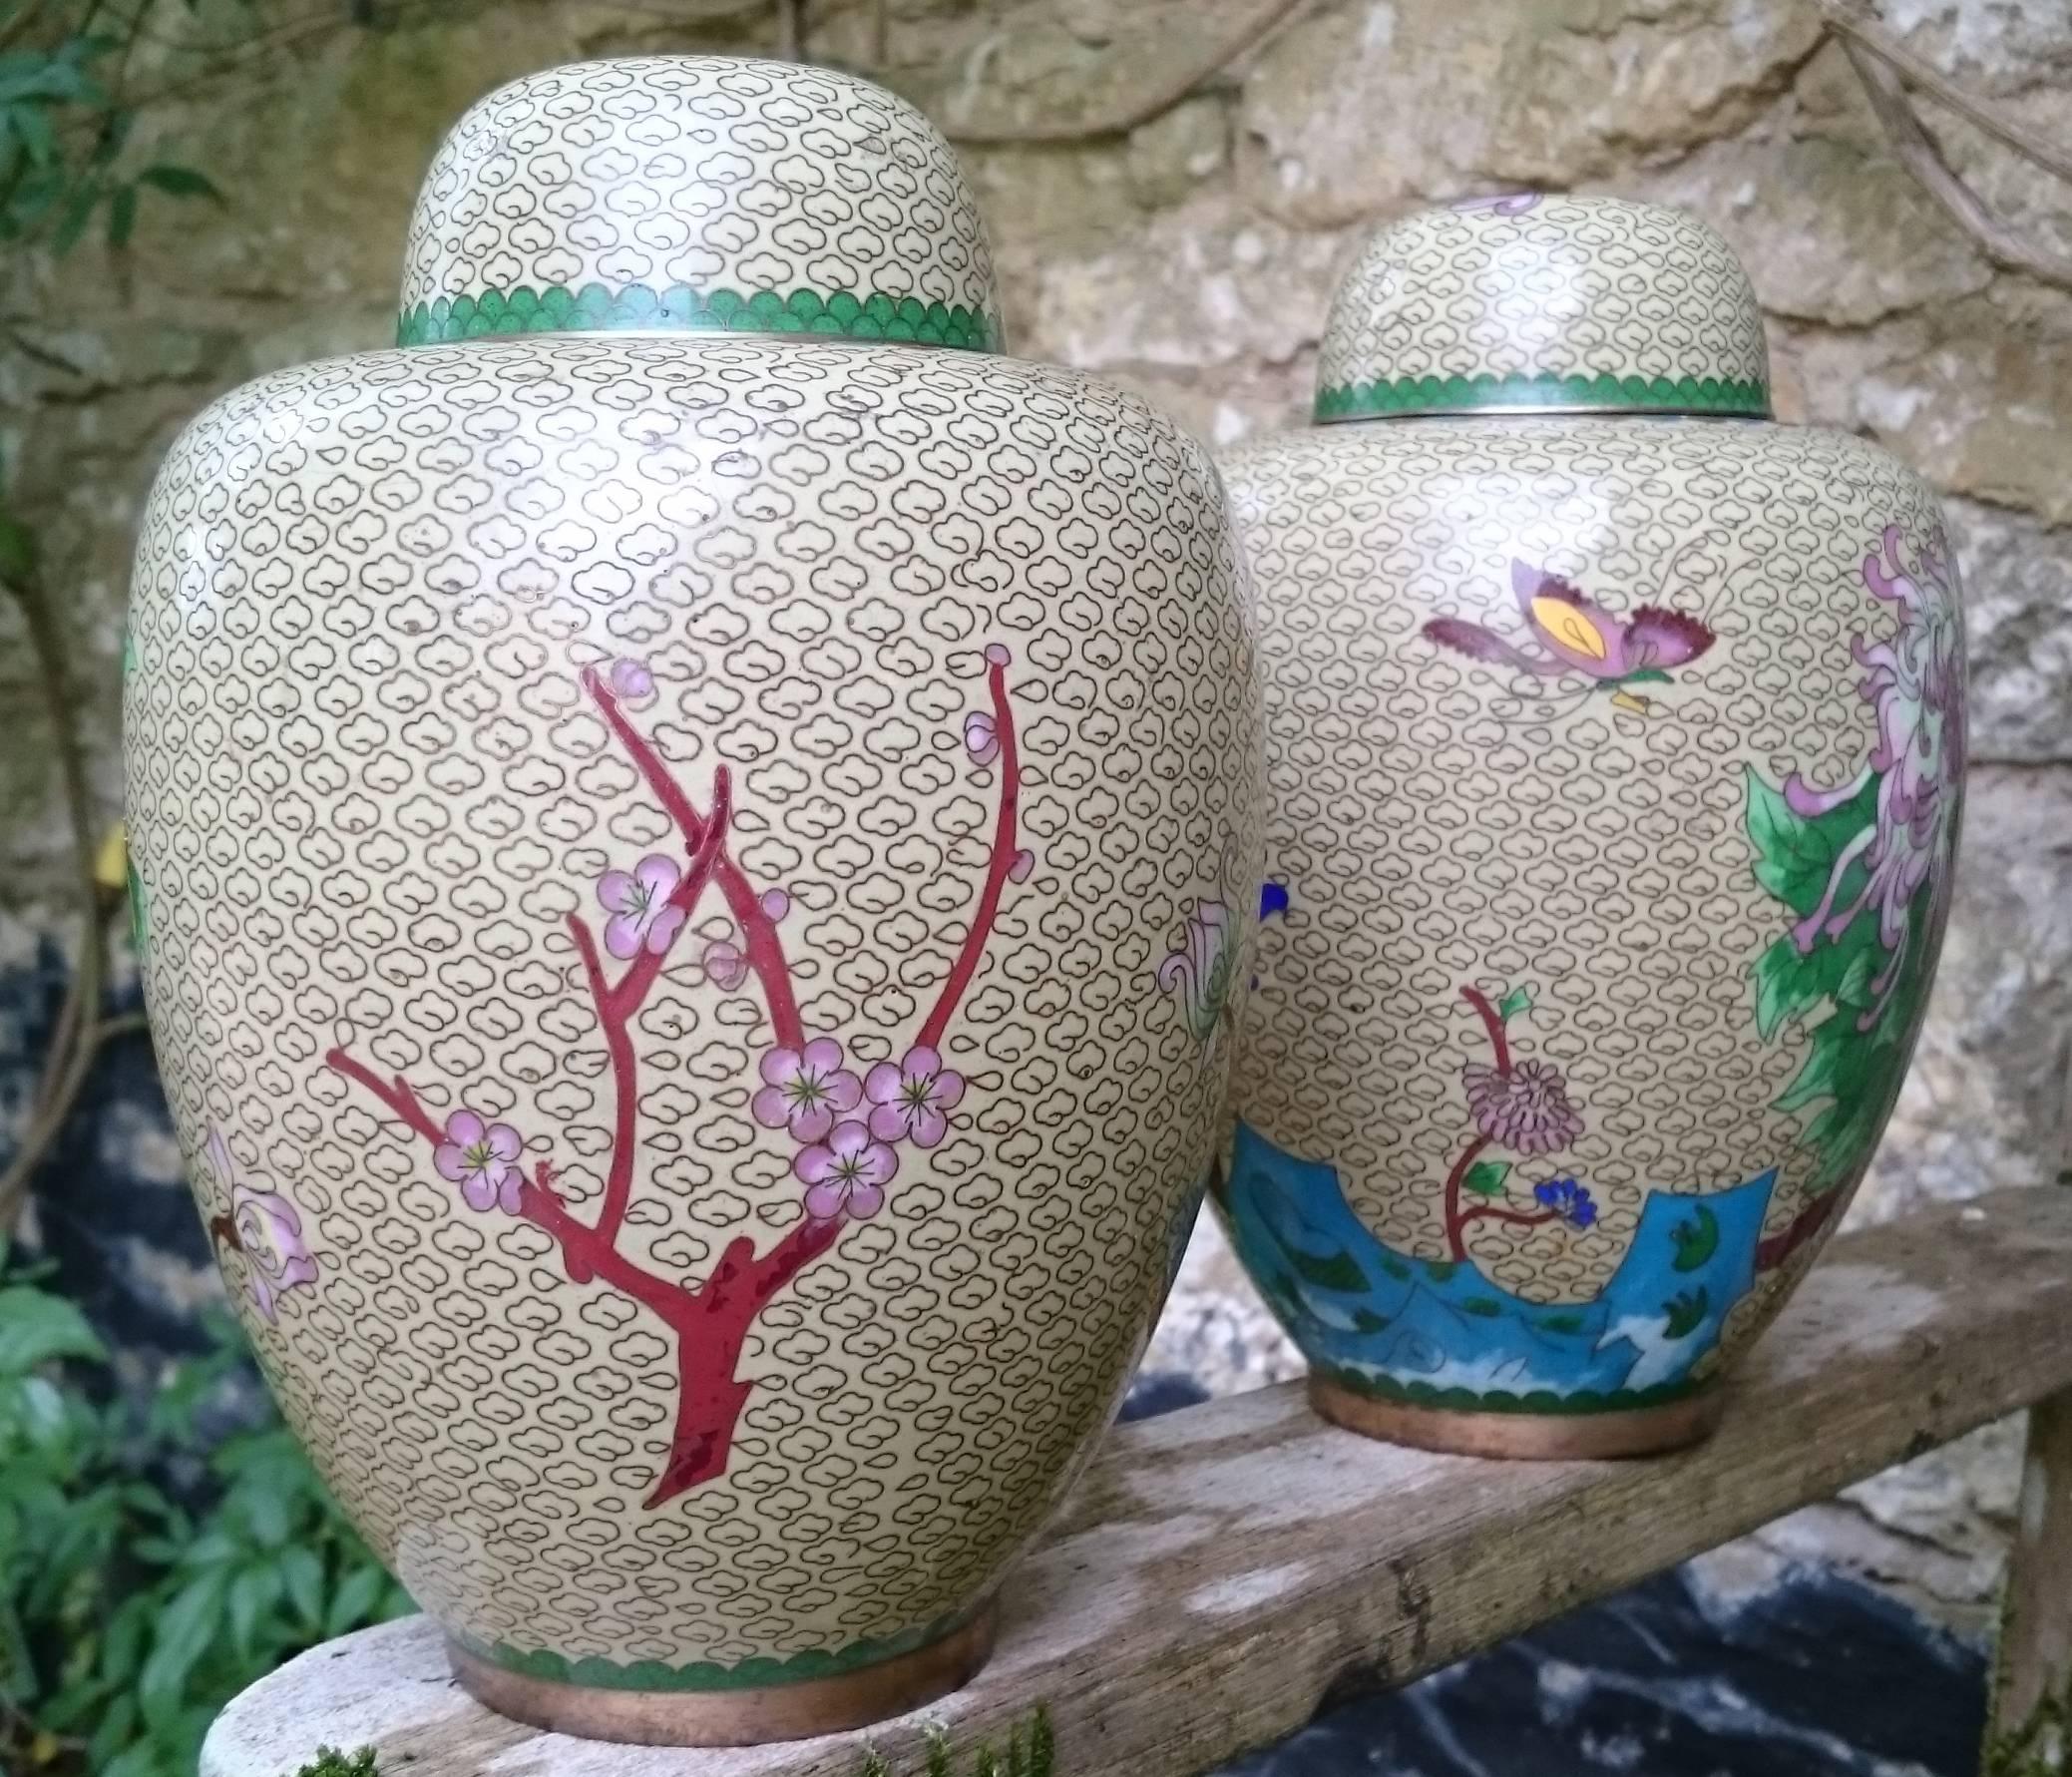 Pair of Chinese cloisonné enamel ginger jars with lids. This pair of jars are in very good condition with very detailed cloisonné work. The decoration on the jars are a mirror image rather than being identical, this is a good sign of quality as a